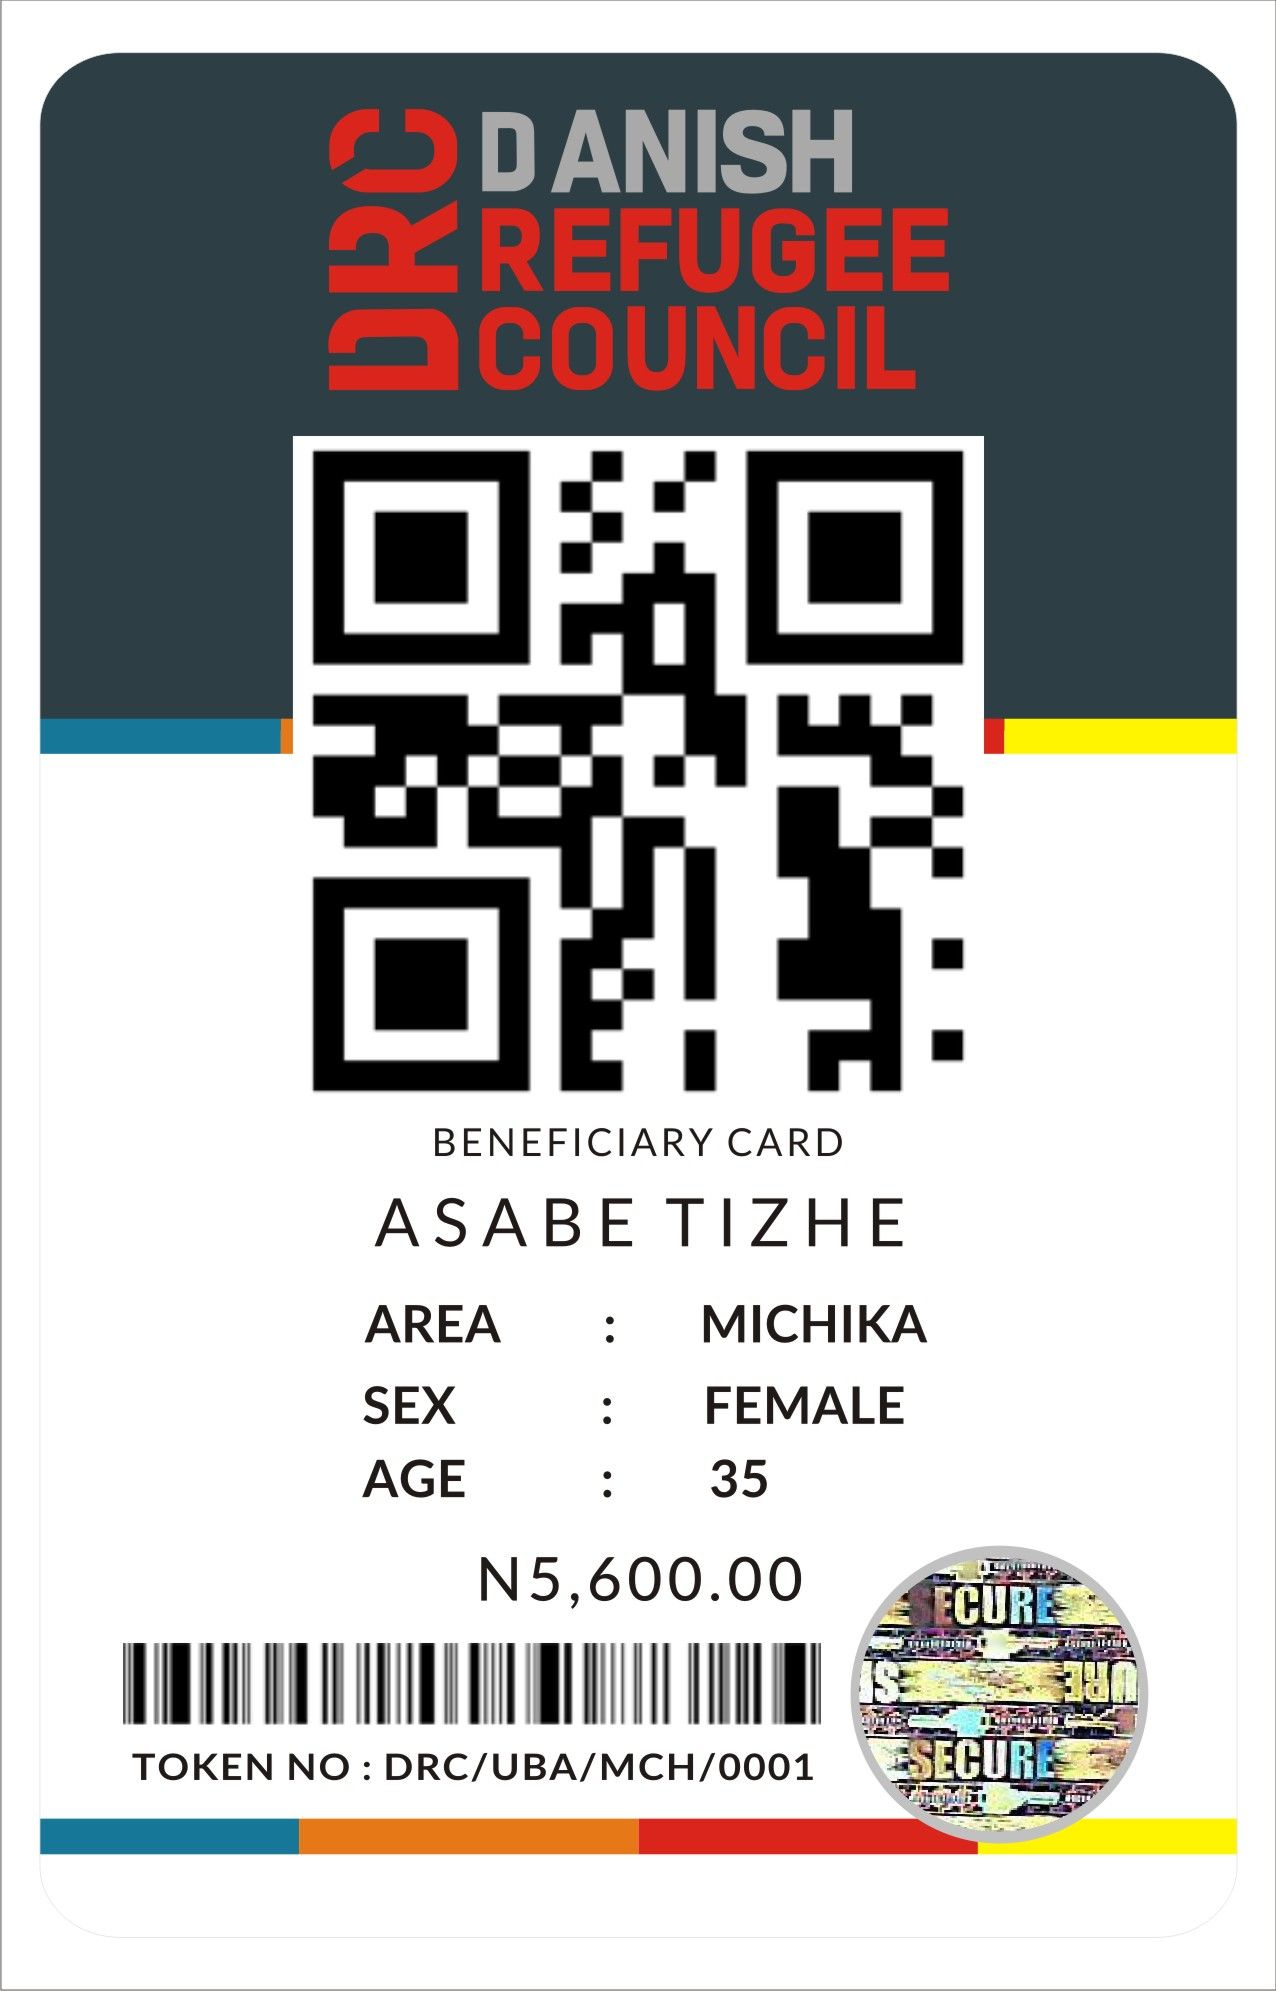 CALL CHINEDU ON 09022536974 TO PRINT AUTHENTICATION LABELS